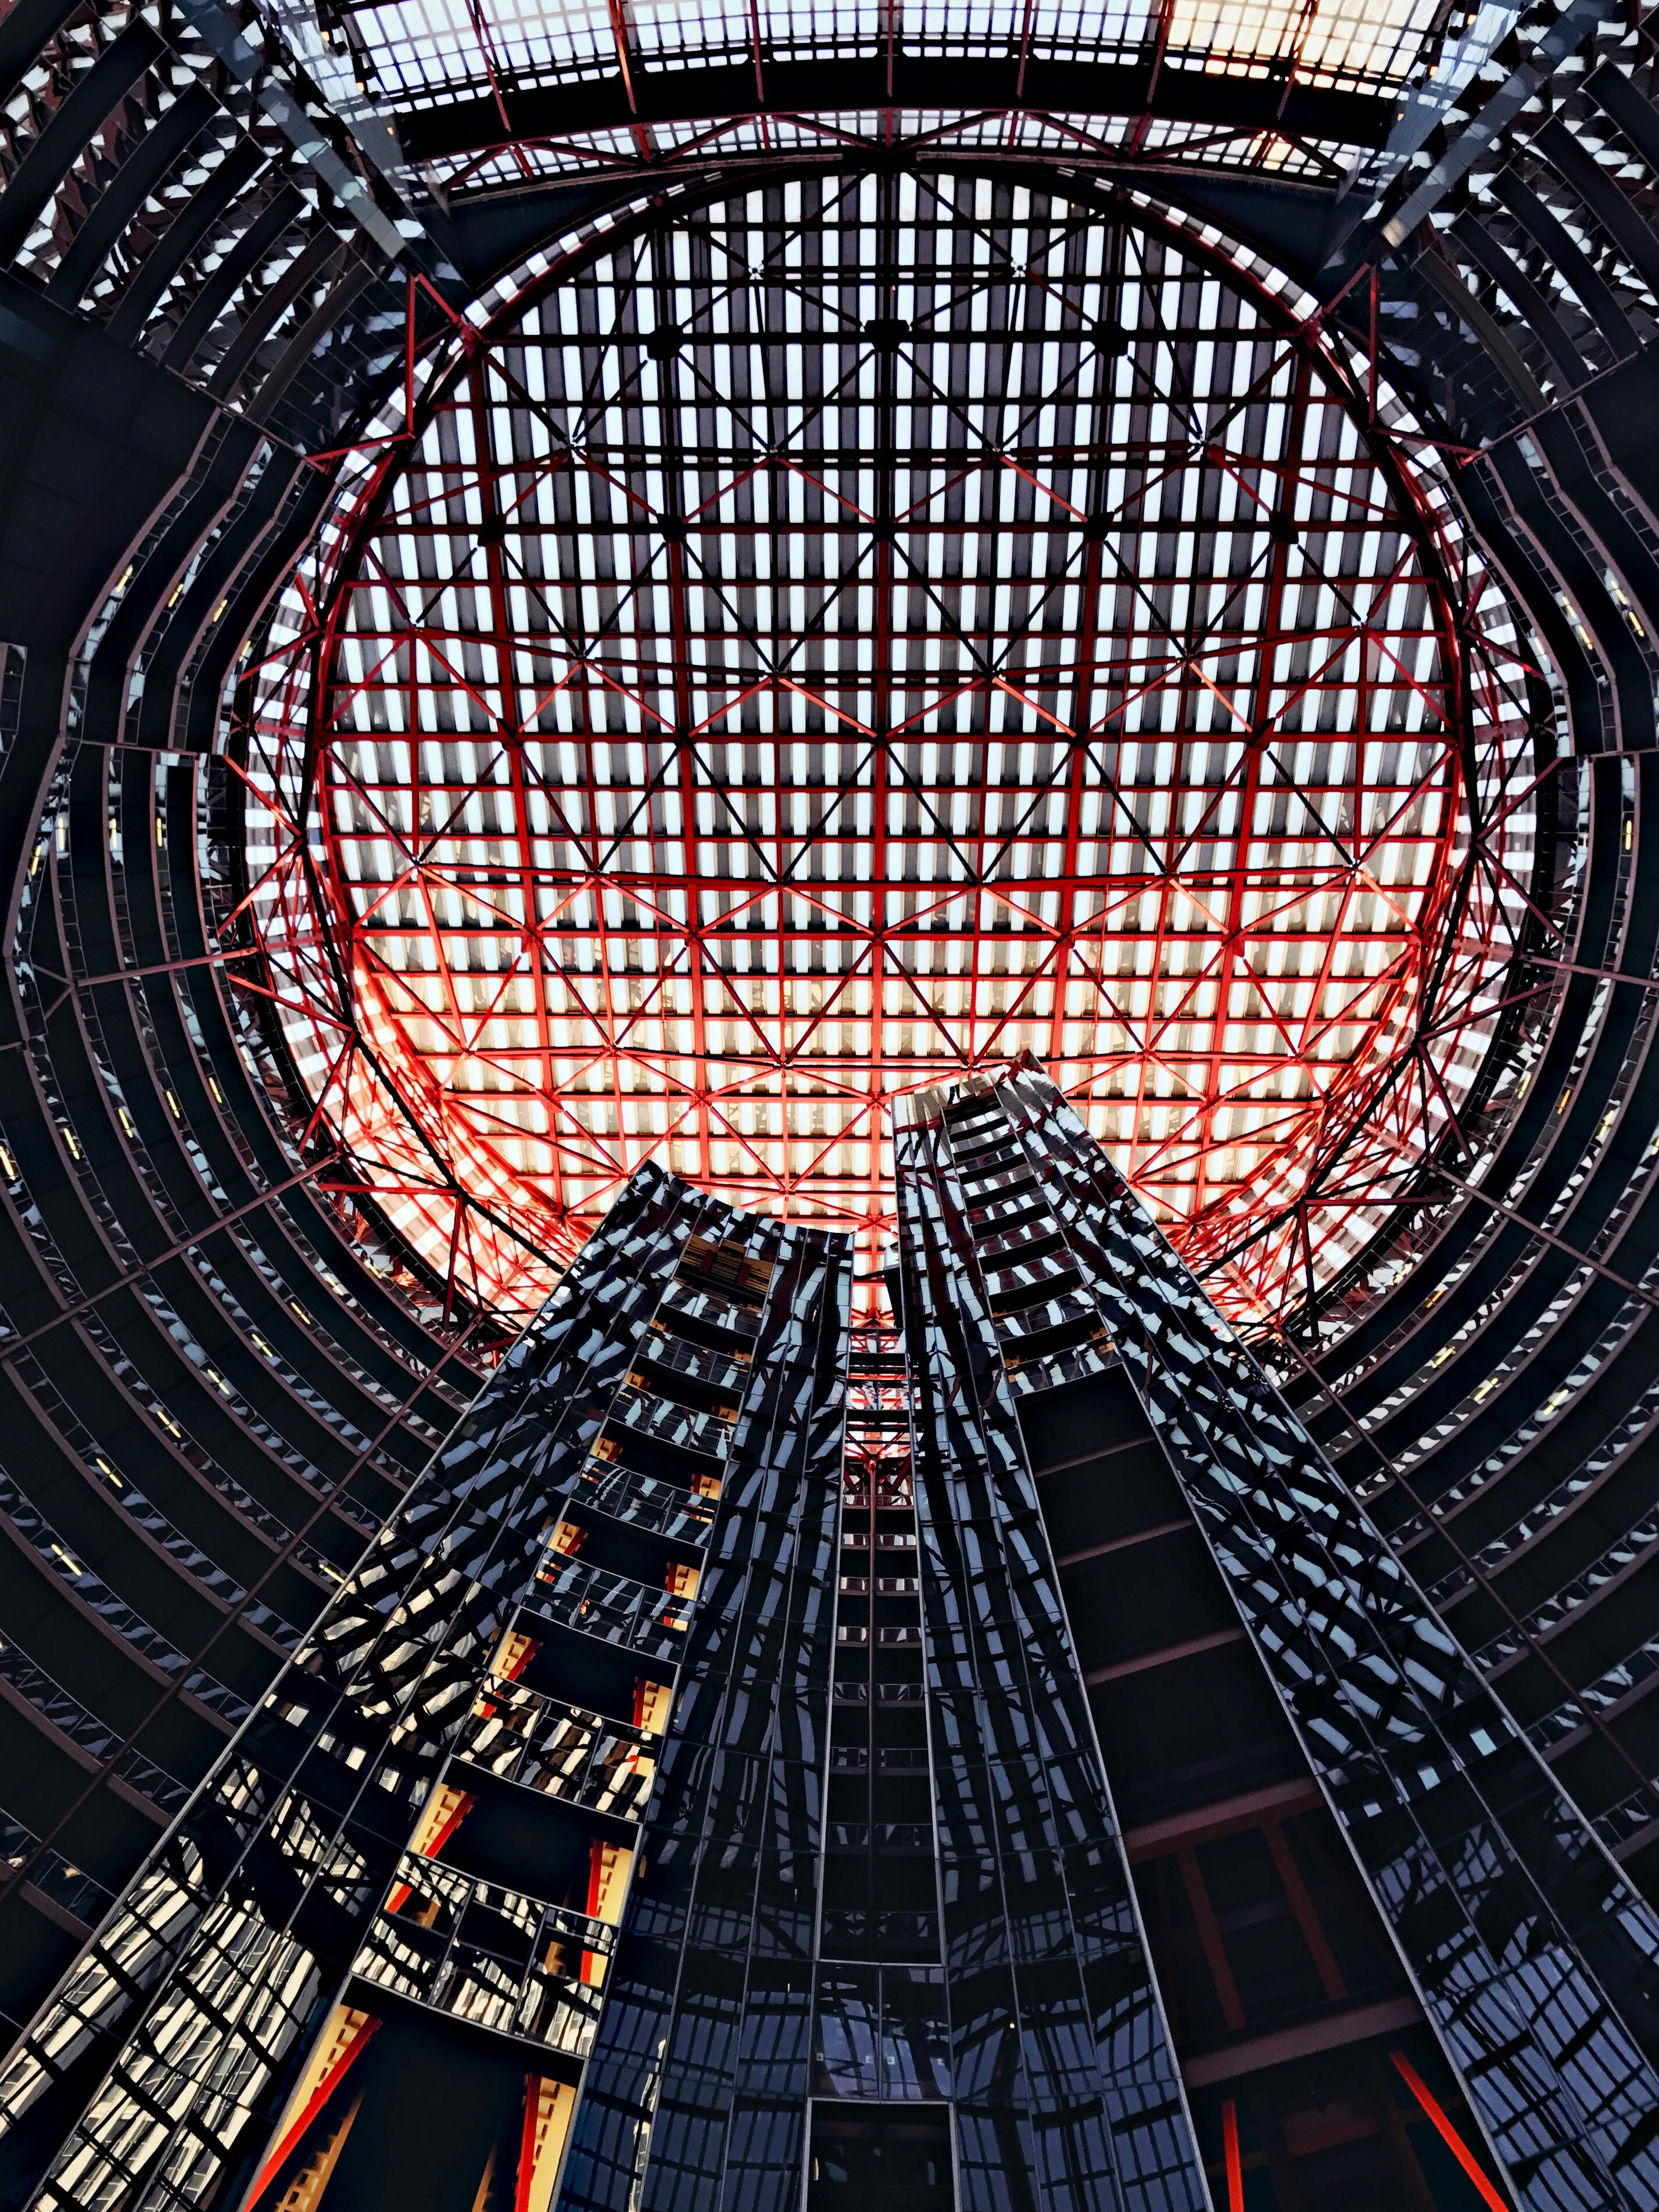 View of the Thompson Center in Chicago, looking up from the ground level.